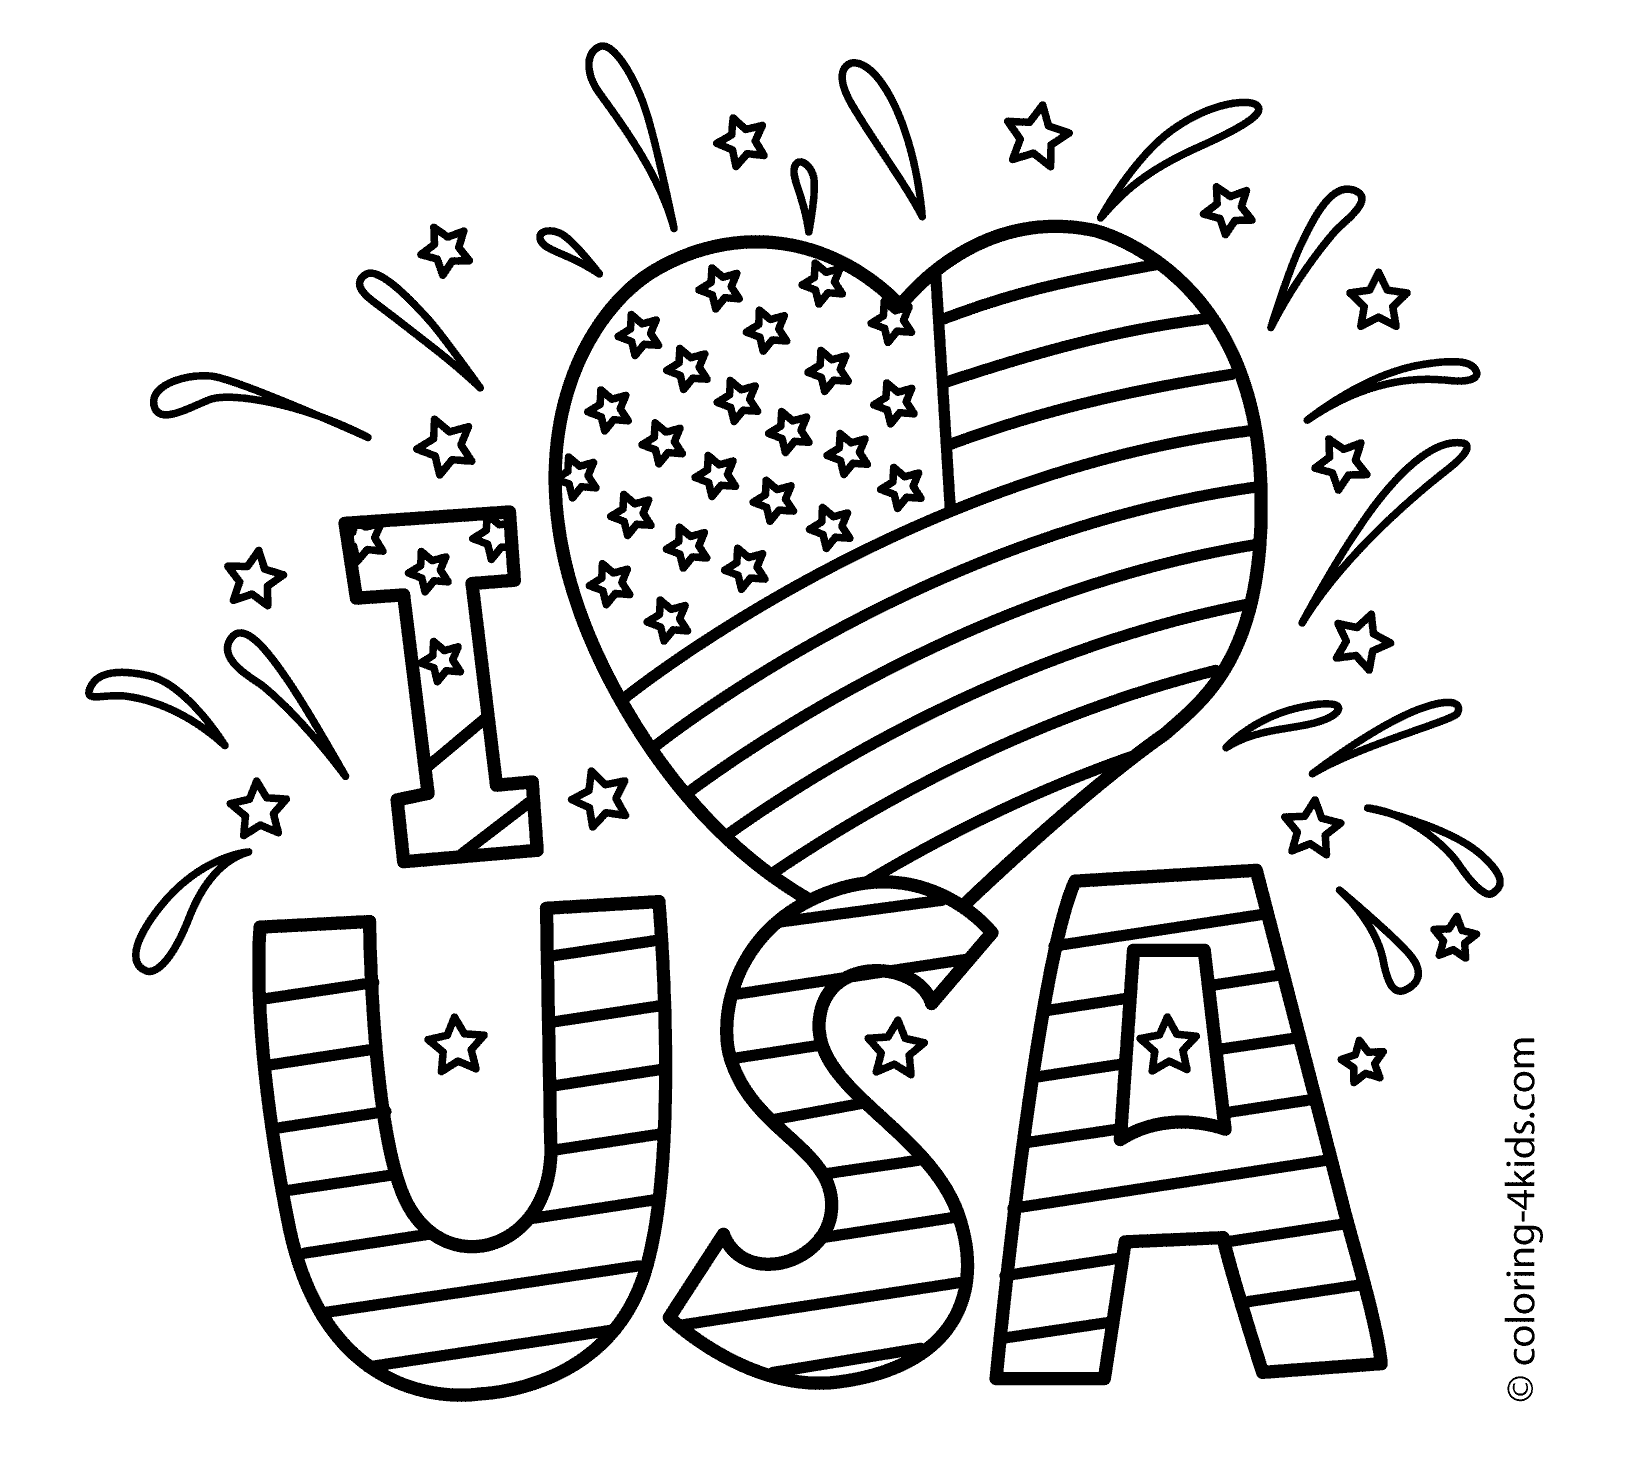 united states coloring pages for kids - photo #37